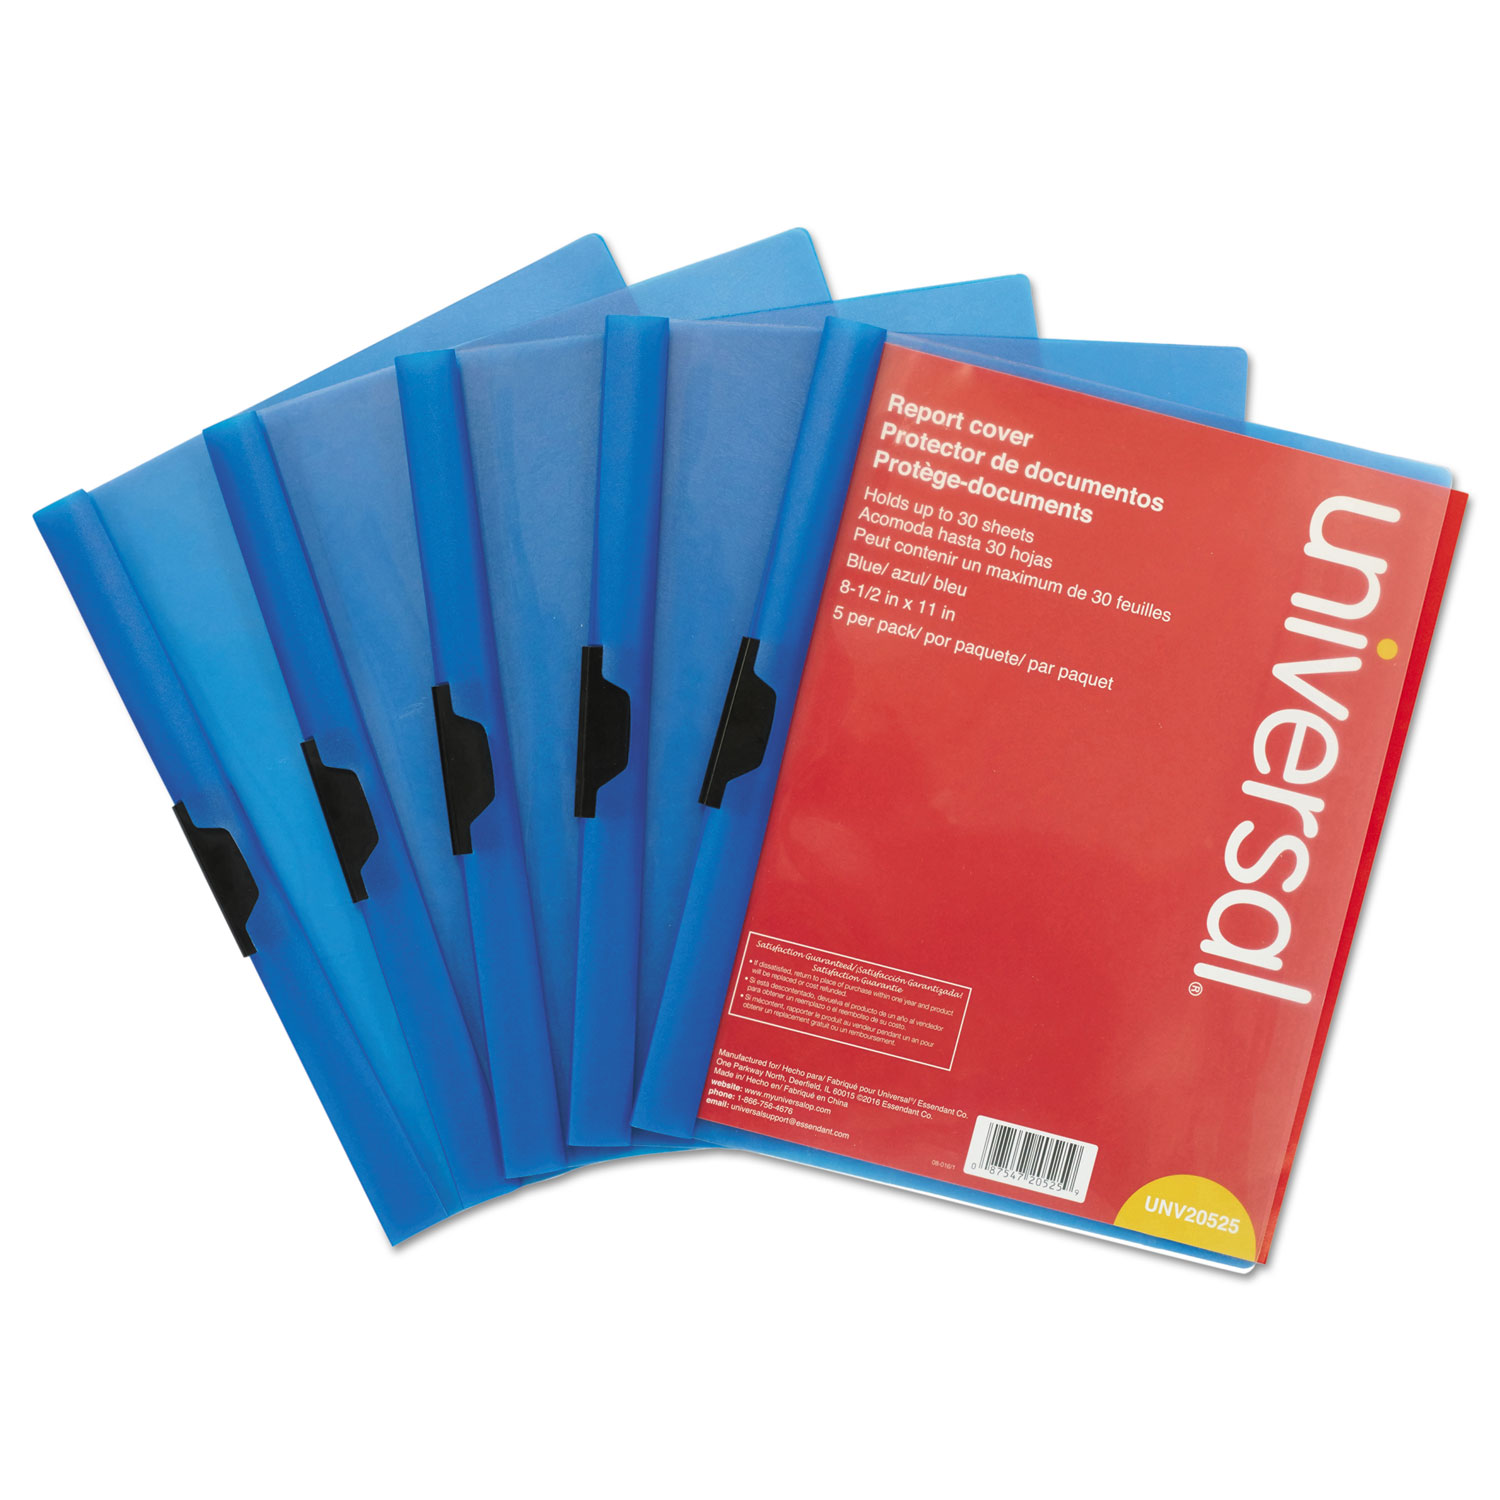  Universal UNV20525 Plastic Report Cover w/Clip, Letter, Holds 30 Pages, Clear/Blue, 5/PK (UNV20525) 